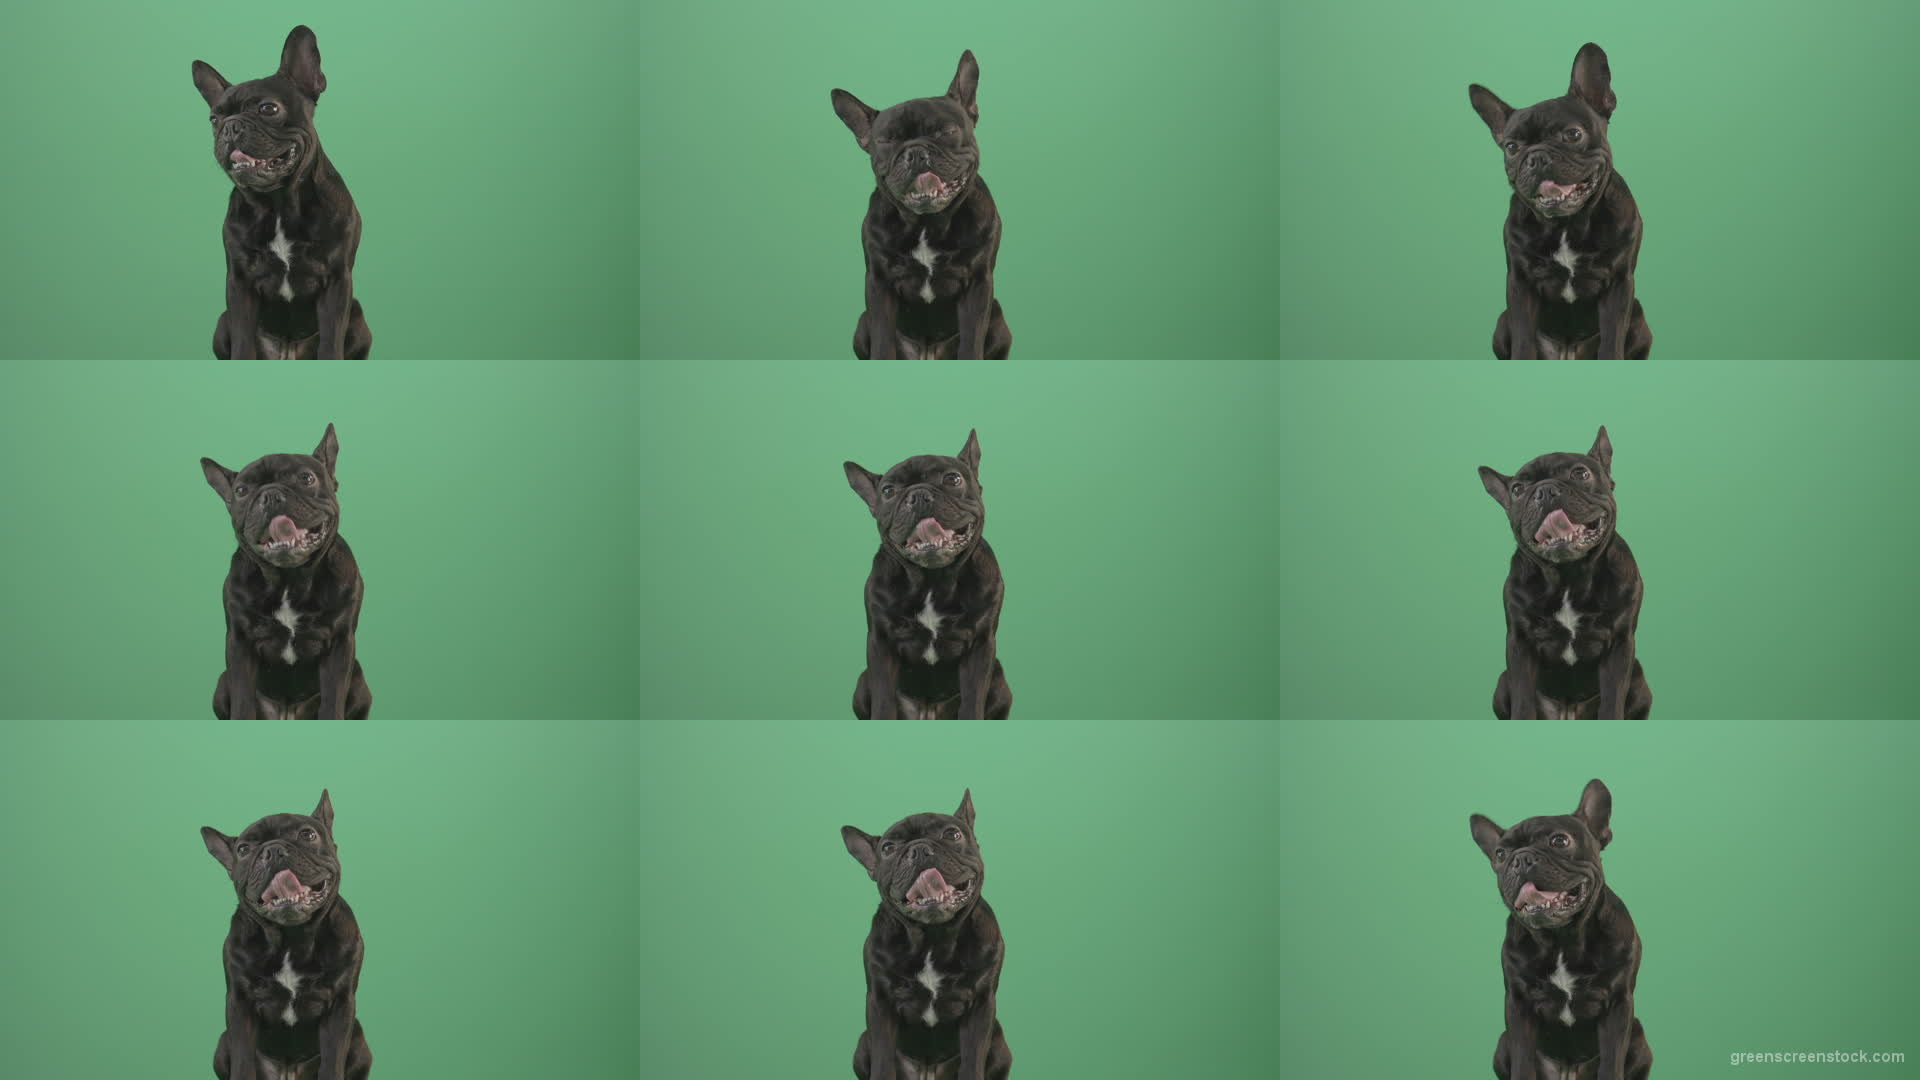 Hard-breathing-french-black-bull-dog-over-green-screen-4K-Video-Footage-1920 Green Screen Stock